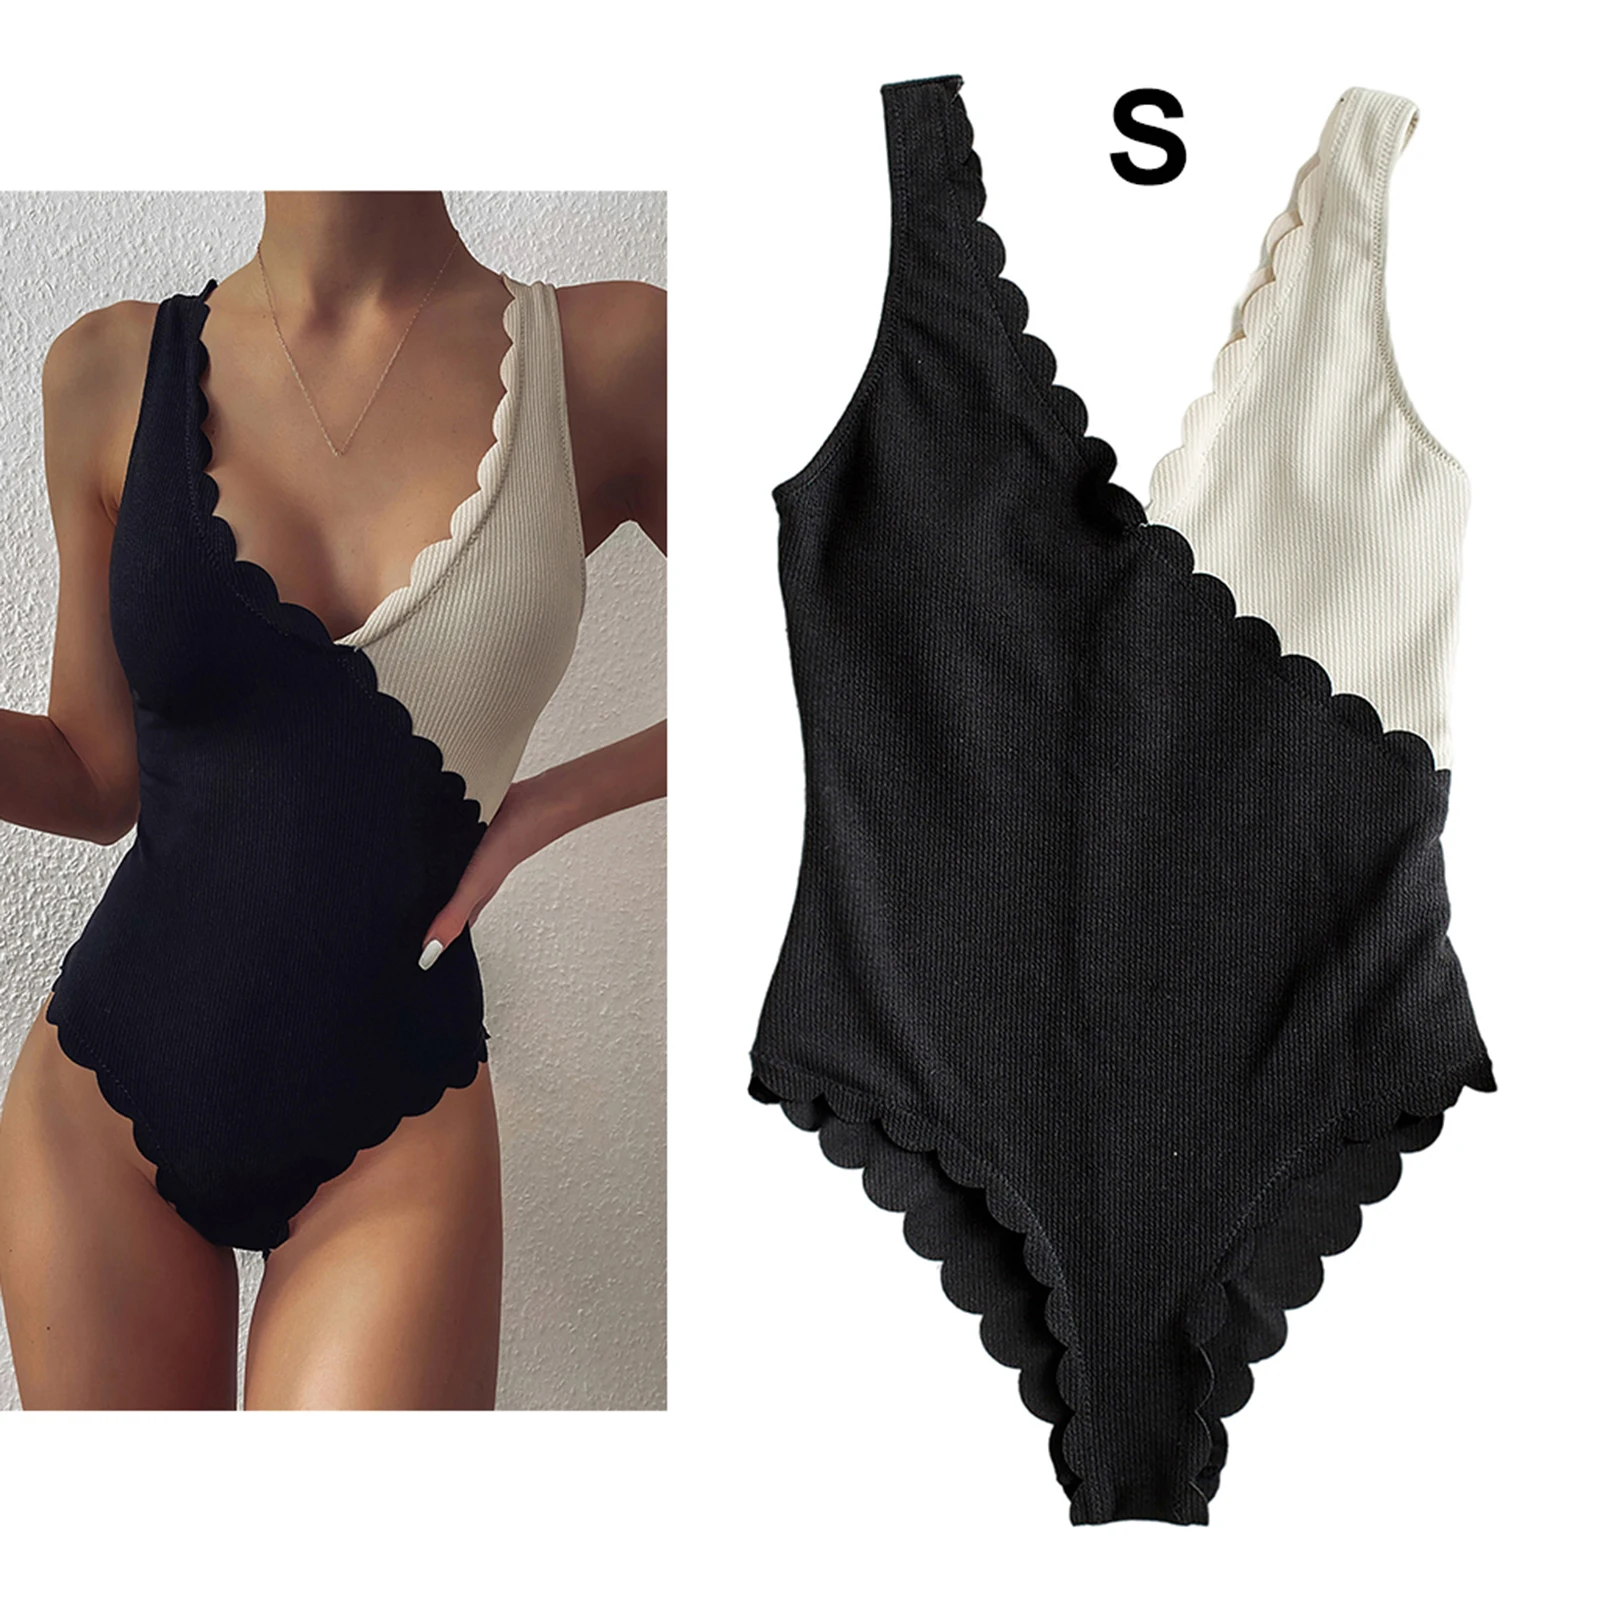 V Neck One Piece Womens Swimsuits Solid Color Pacthwork Stretchy Lady Fashion Sexy Lace Backless Beach Travel Swimwear 